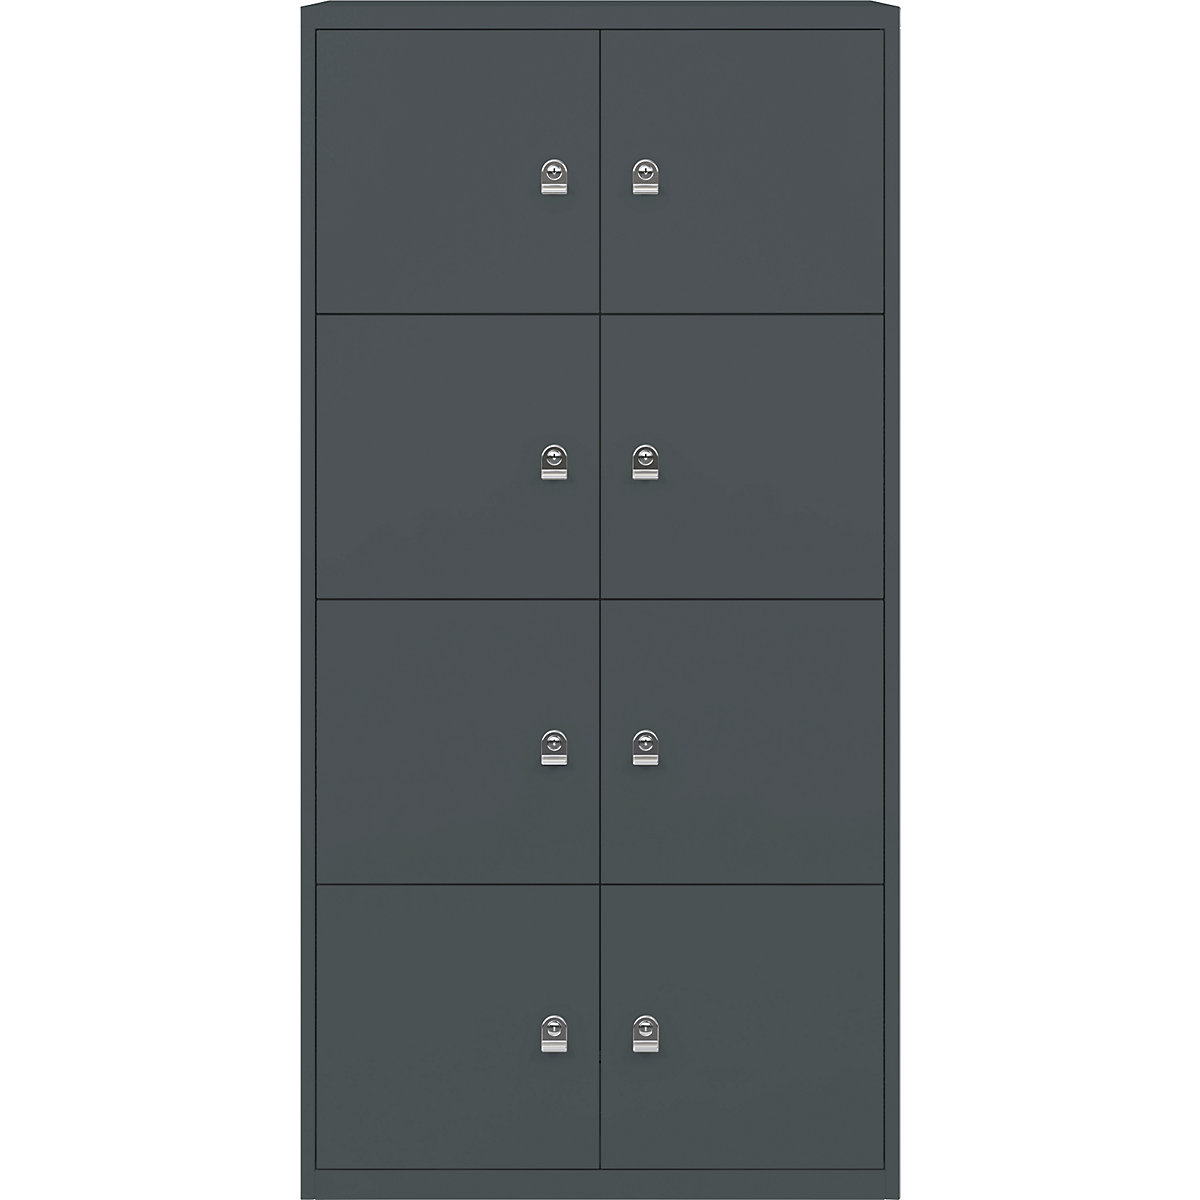 Armoire à casiers LateralFile™ – BISLEY, 8 casiers hauteur 375 mm, anthracite-6